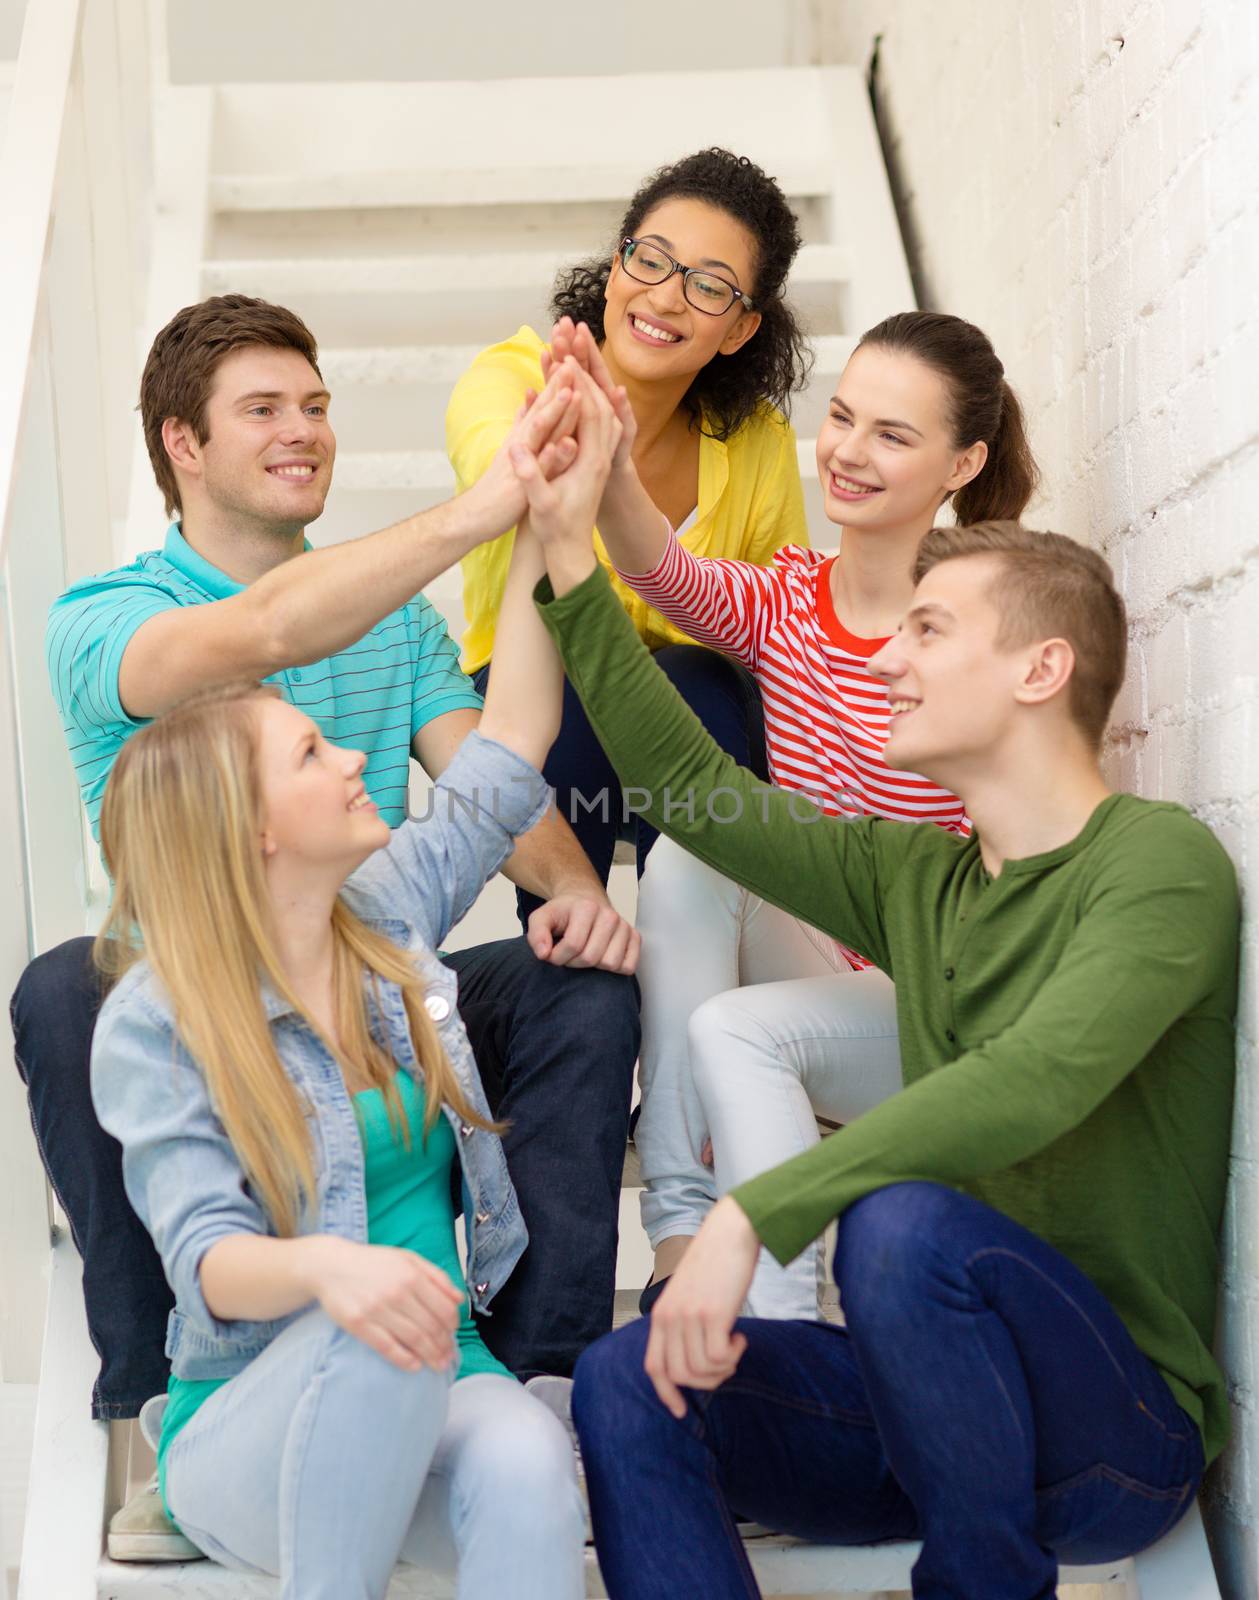 smiling students making high five gesture sitting by dolgachov